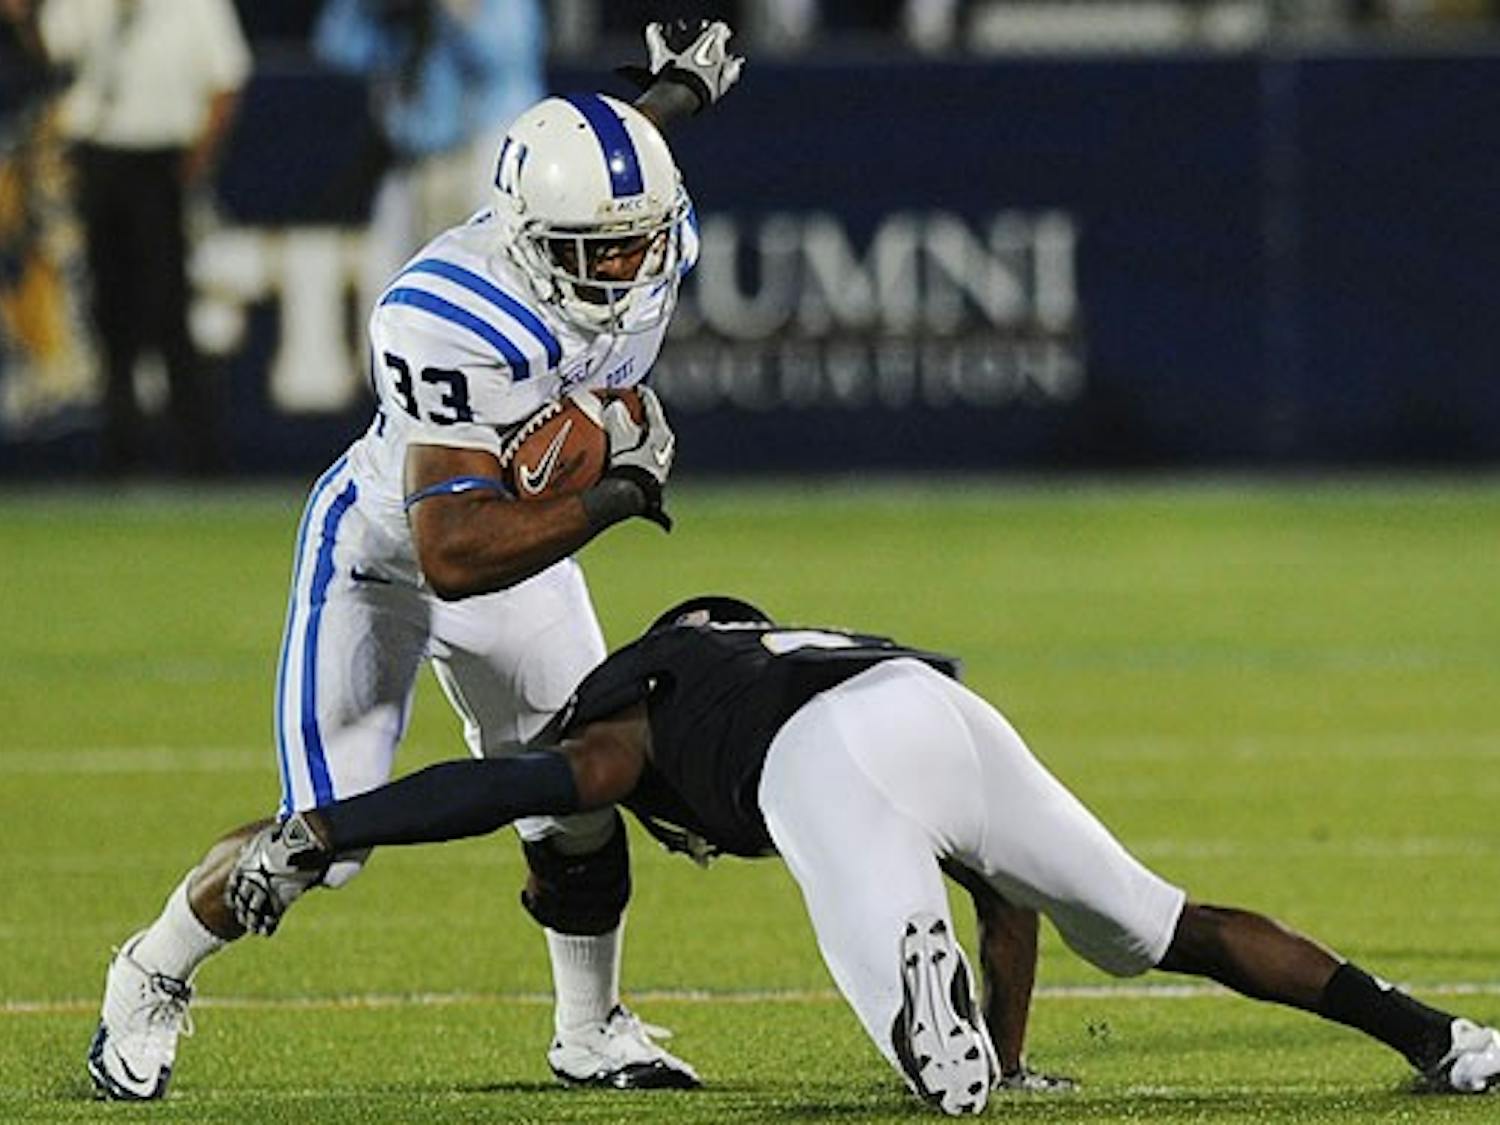 Duke running back Desmond Scott breaks a tackle midway through the Blue Devils’ comeback win over FIU.